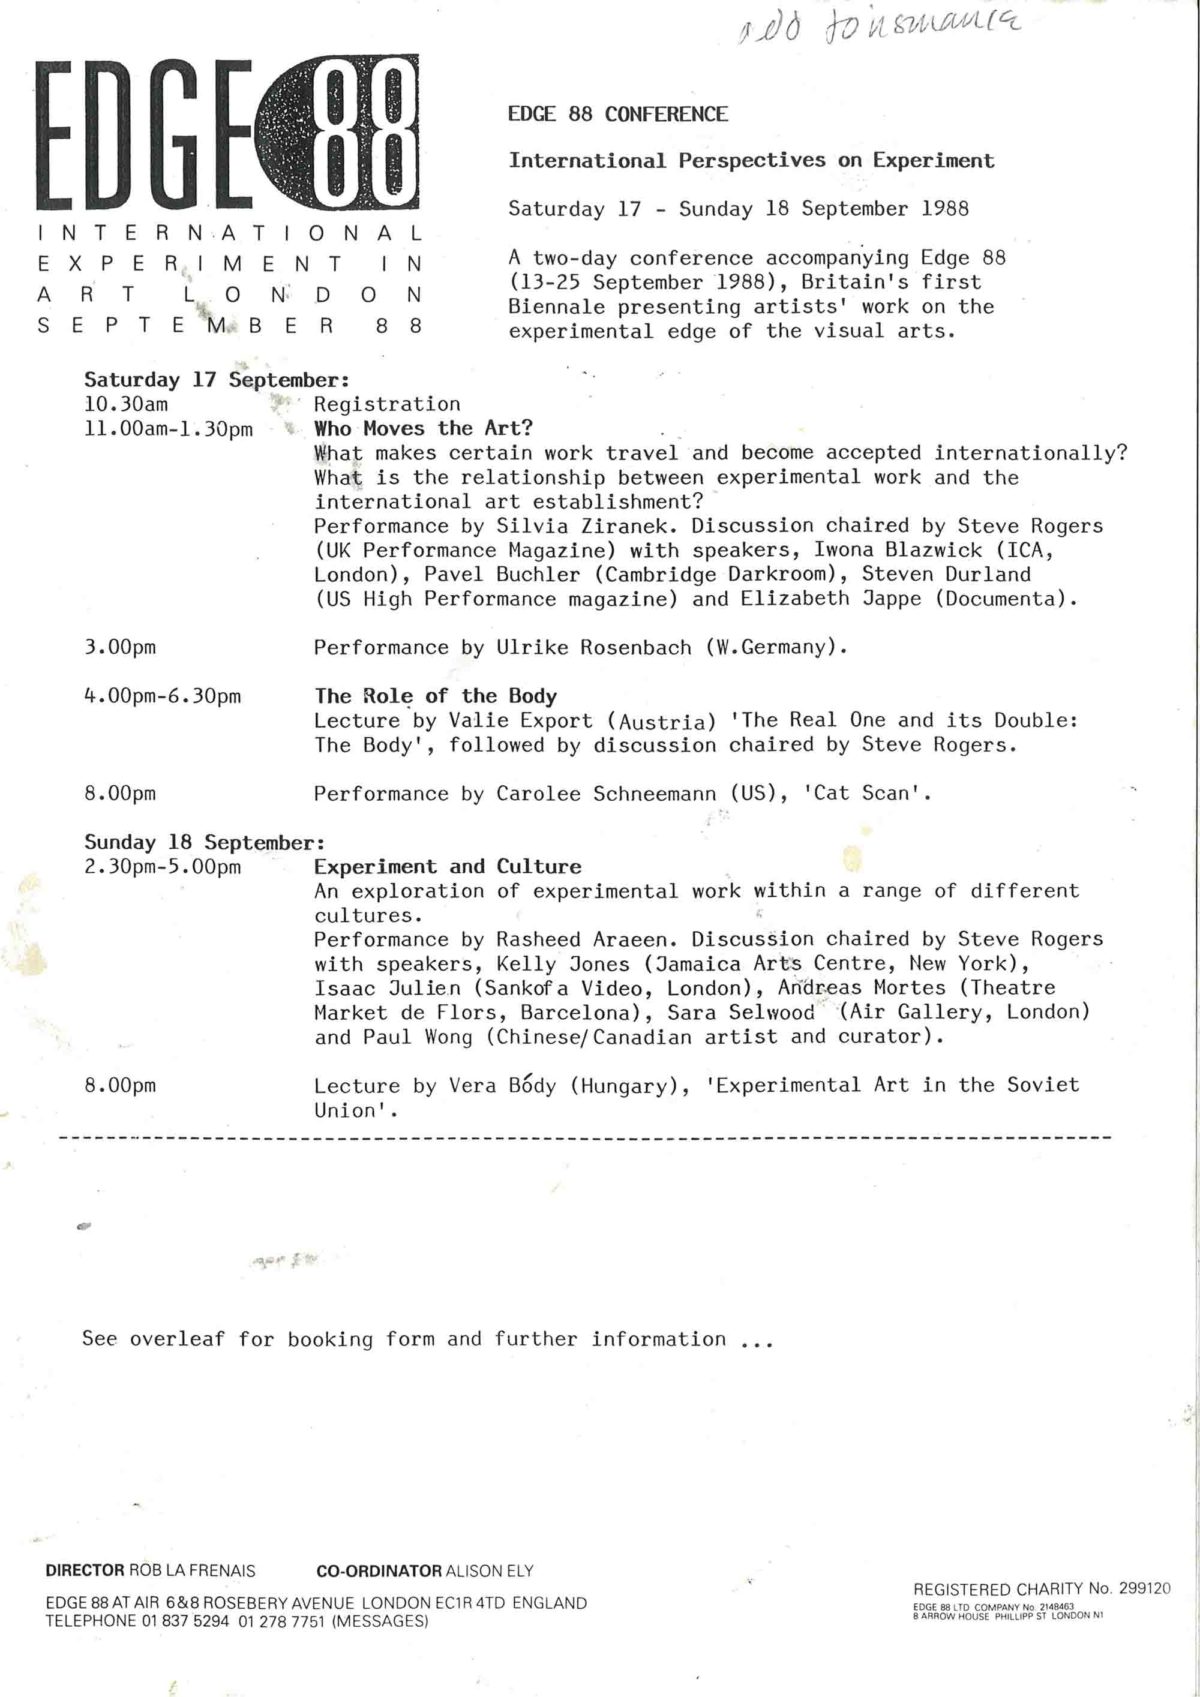 Conference programme, 1988